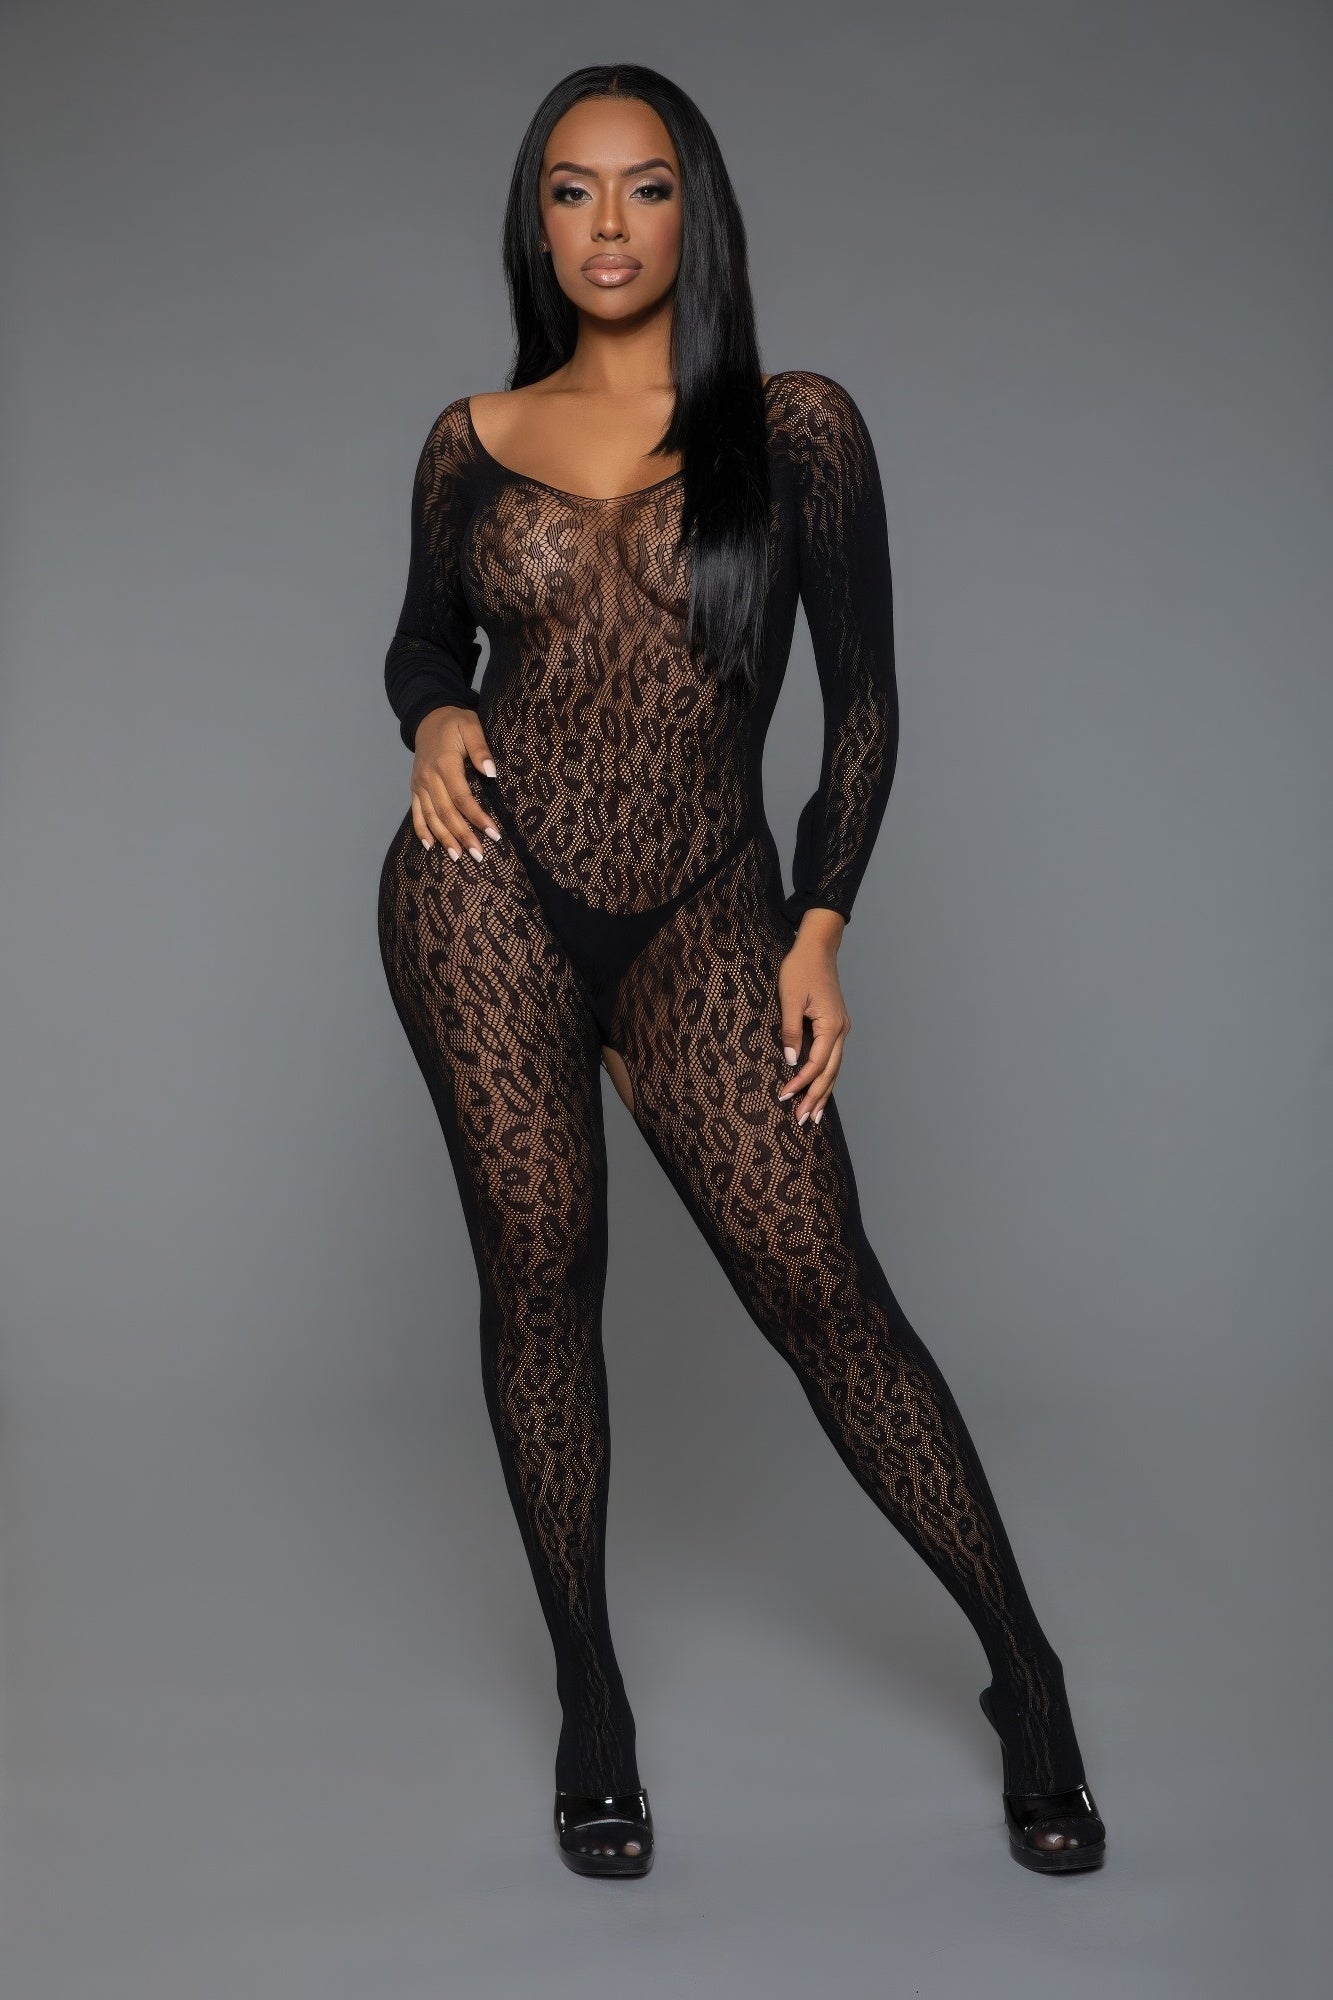 Animal Instinct Bodystocking | ACCESSORIES, APPAREL, Black, CCPRODUCTS, LINGERIE, NEW ARRIVALS | Bodiied